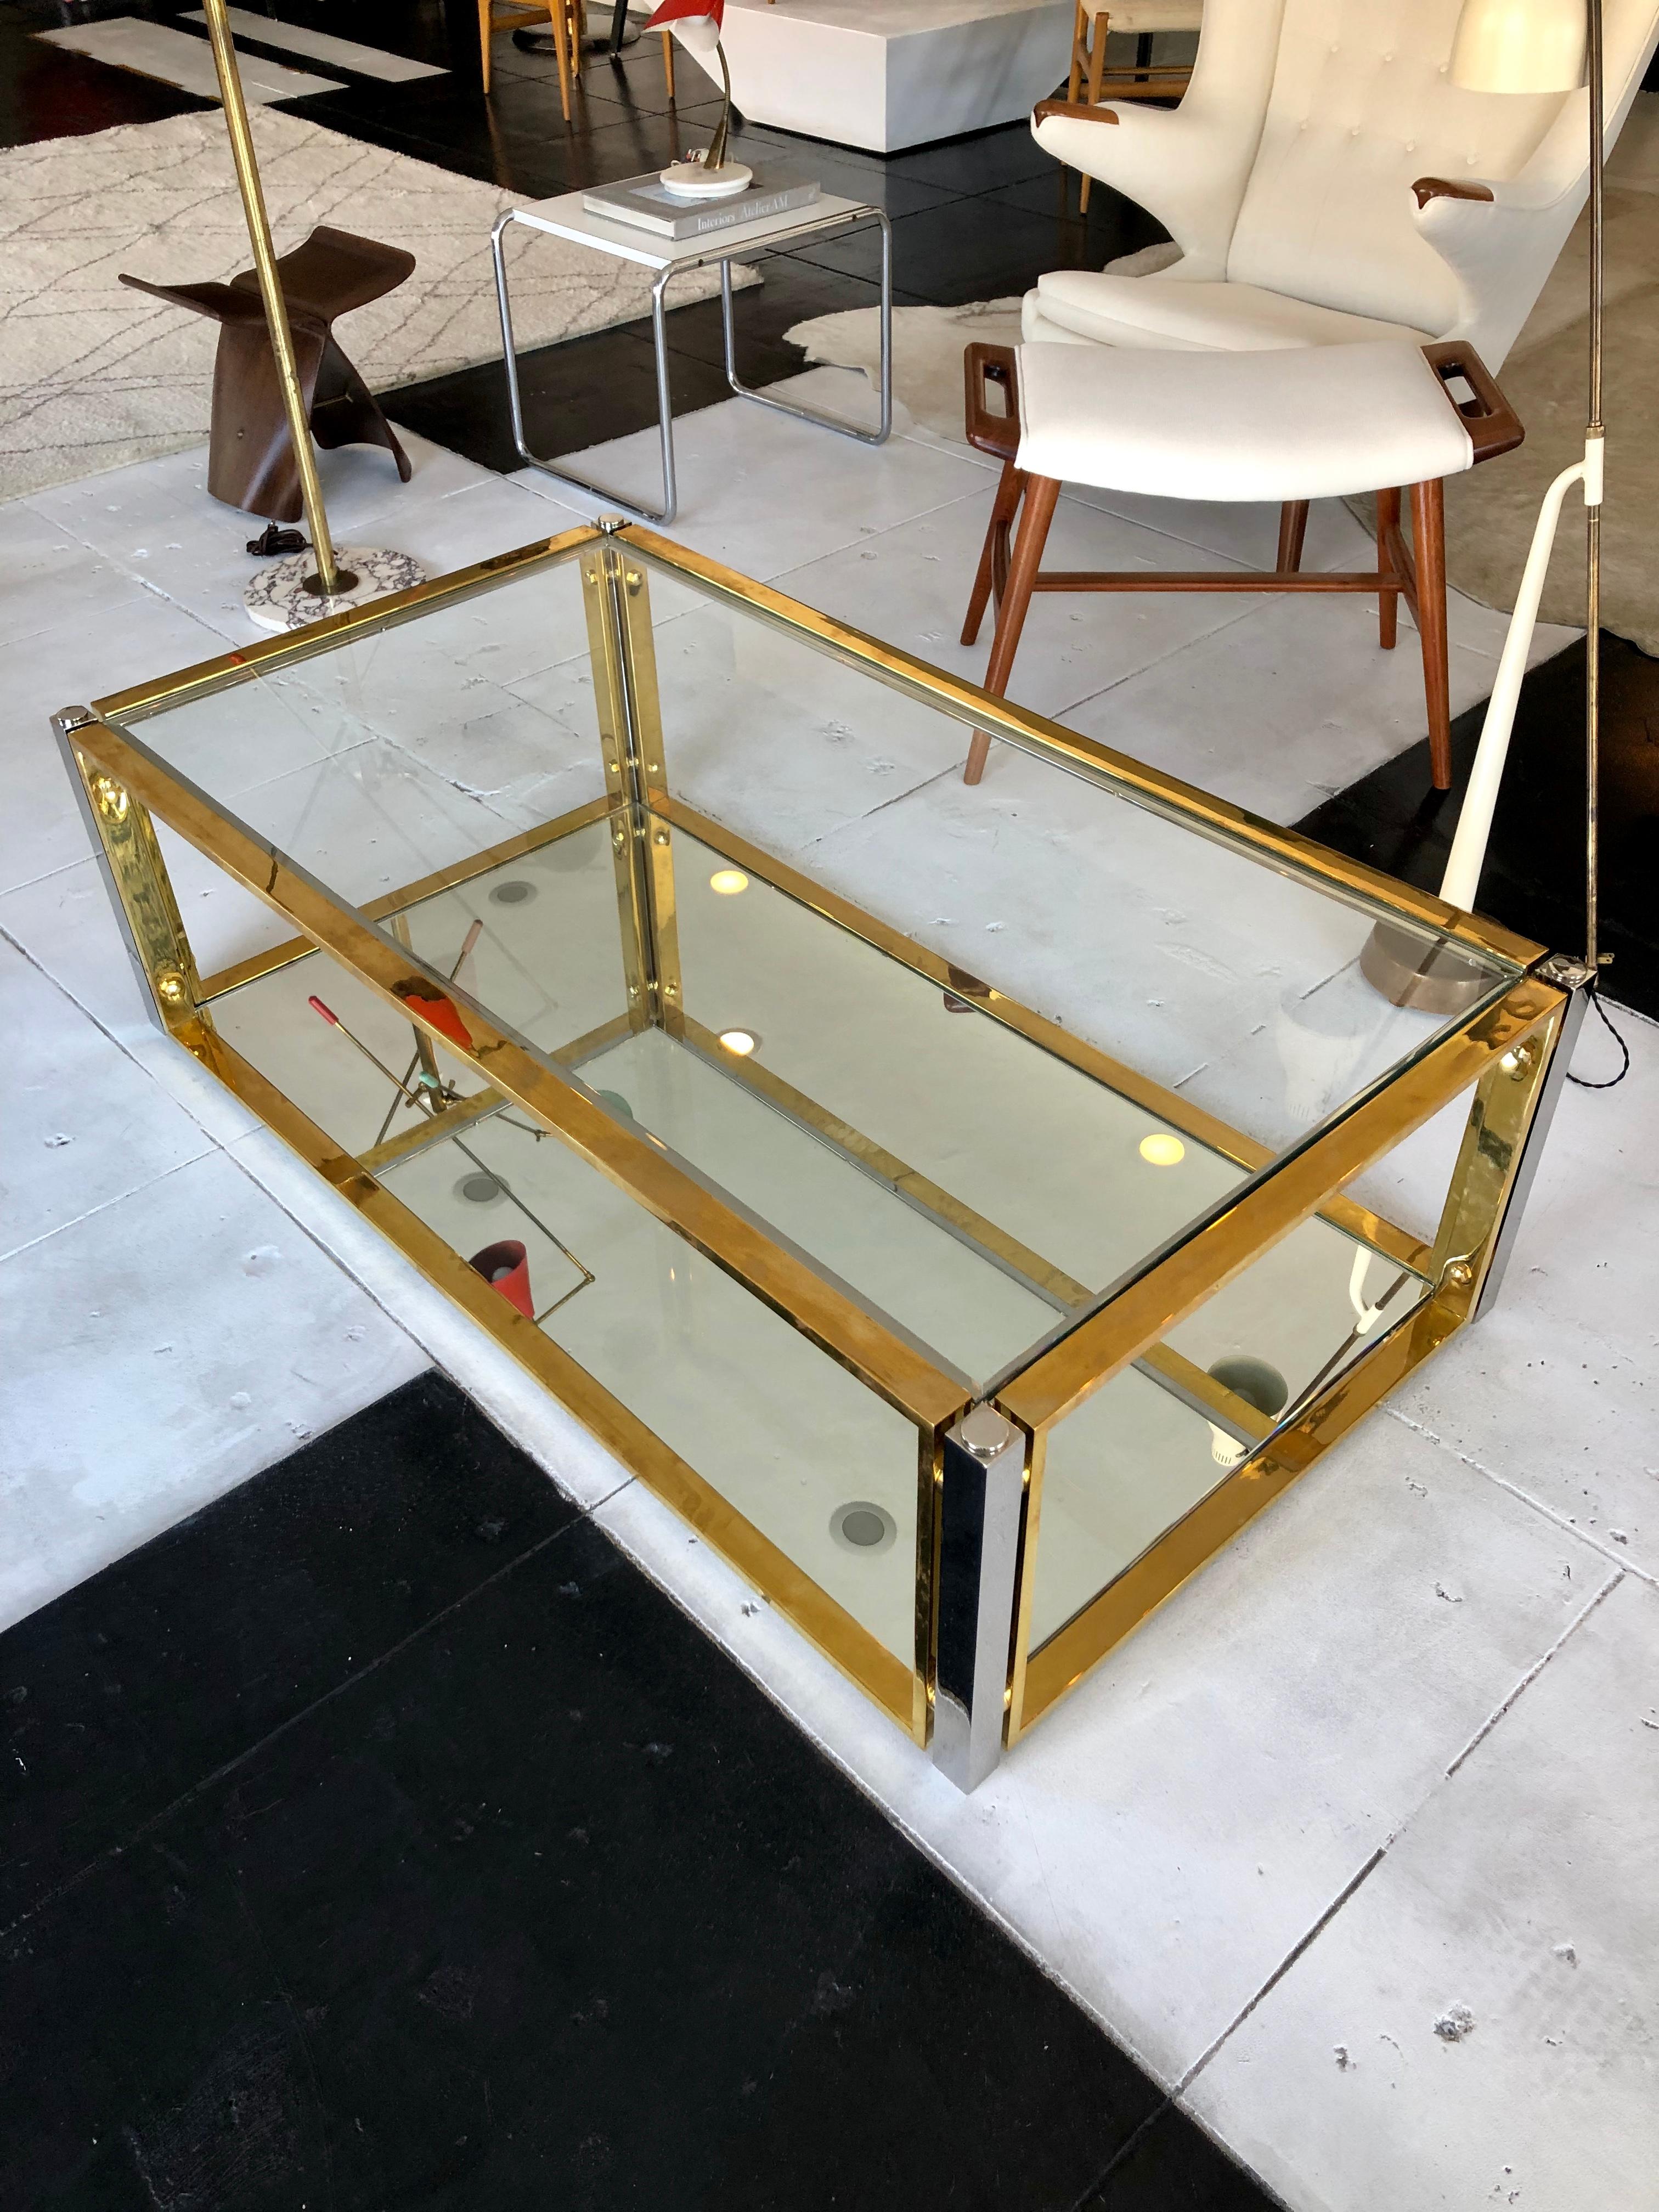 Most elegant two-tone French coffee table, 1960s. Brass and chrome with glass top and mirror on bottom shelf.